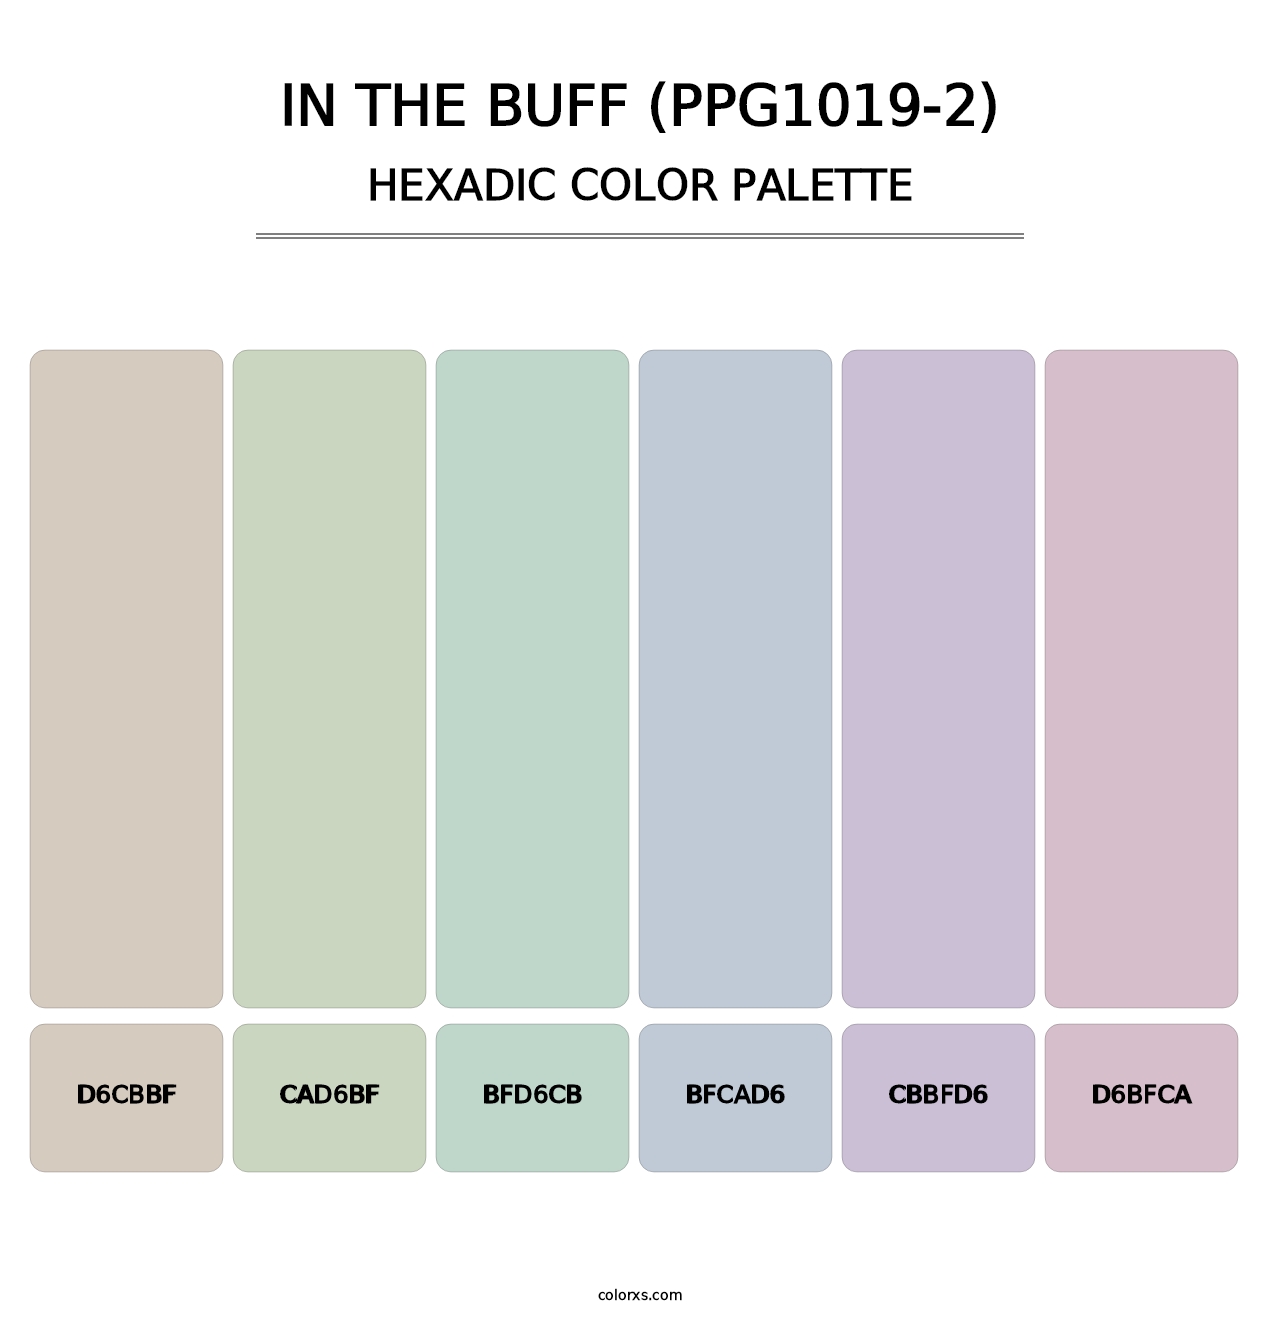 In The Buff (PPG1019-2) - Hexadic Color Palette